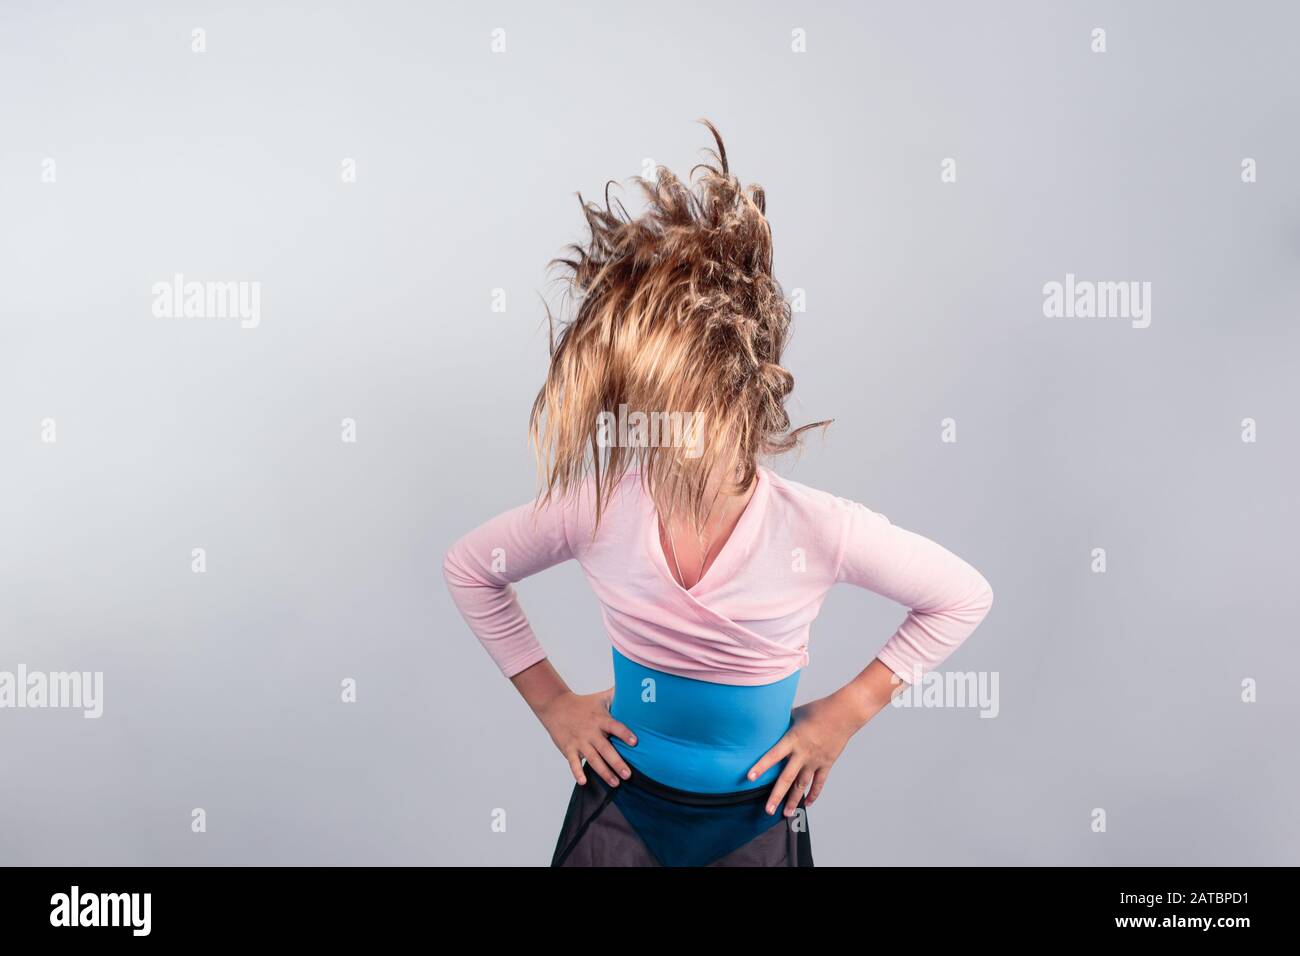 Cheerful teenage girl in pink and blue ballet outfit waving long blond hair which is covering her face. isolated on grey background Stock Photo